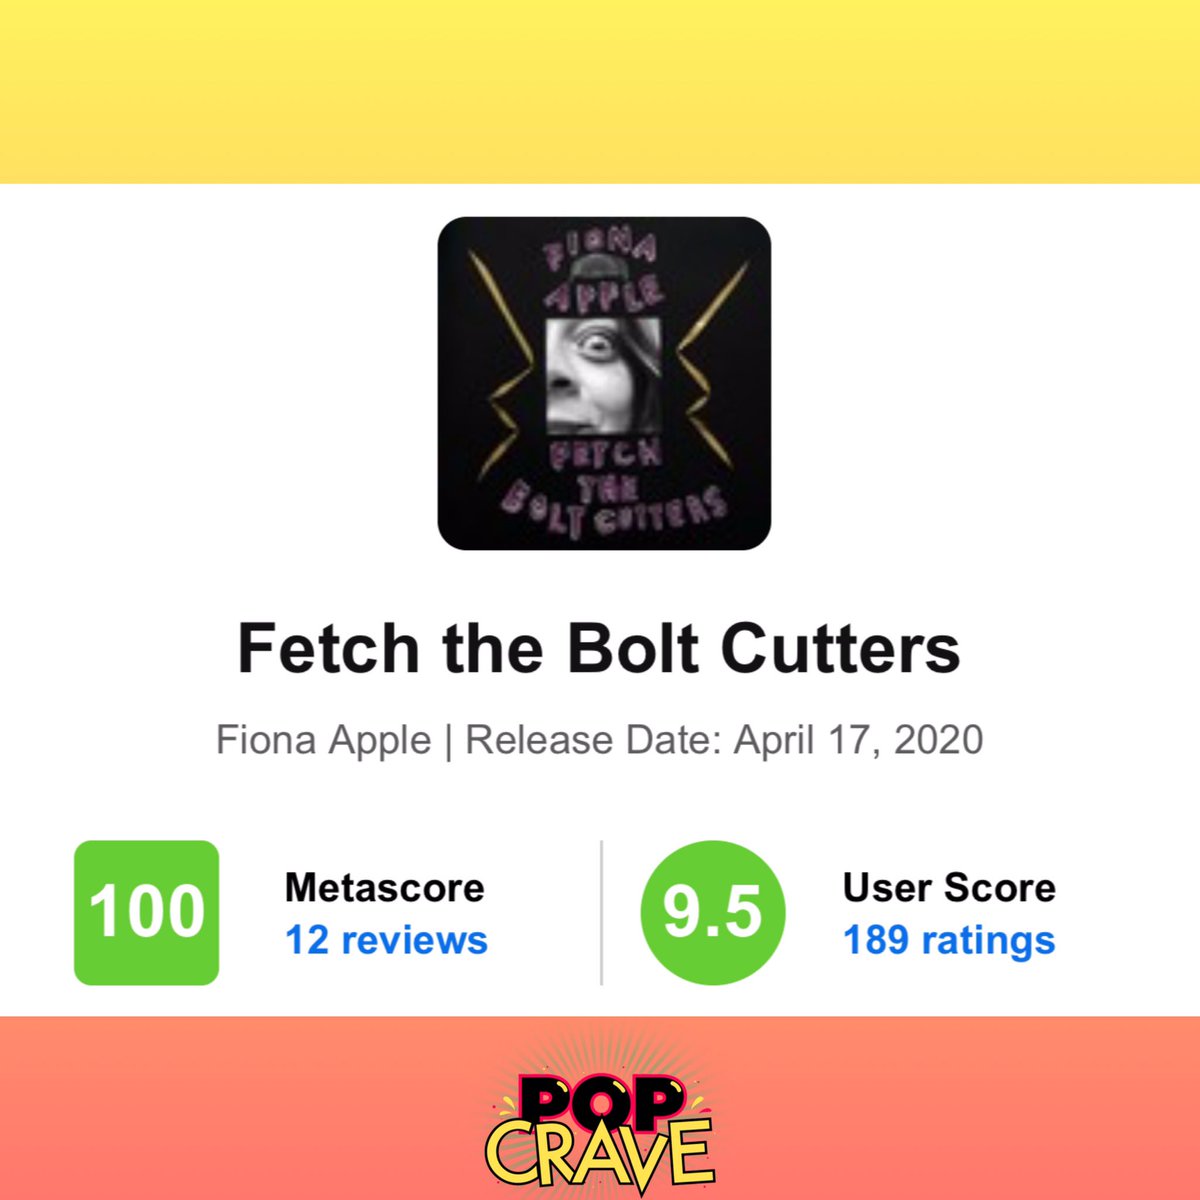 #FionaApple’s new album, ‘Fetch The Bolt Cutters,’ debuts with a perfect score of 100 on Metacritic, based off 12 reviews.

It is currently the highest-rated album of all-time on the site.